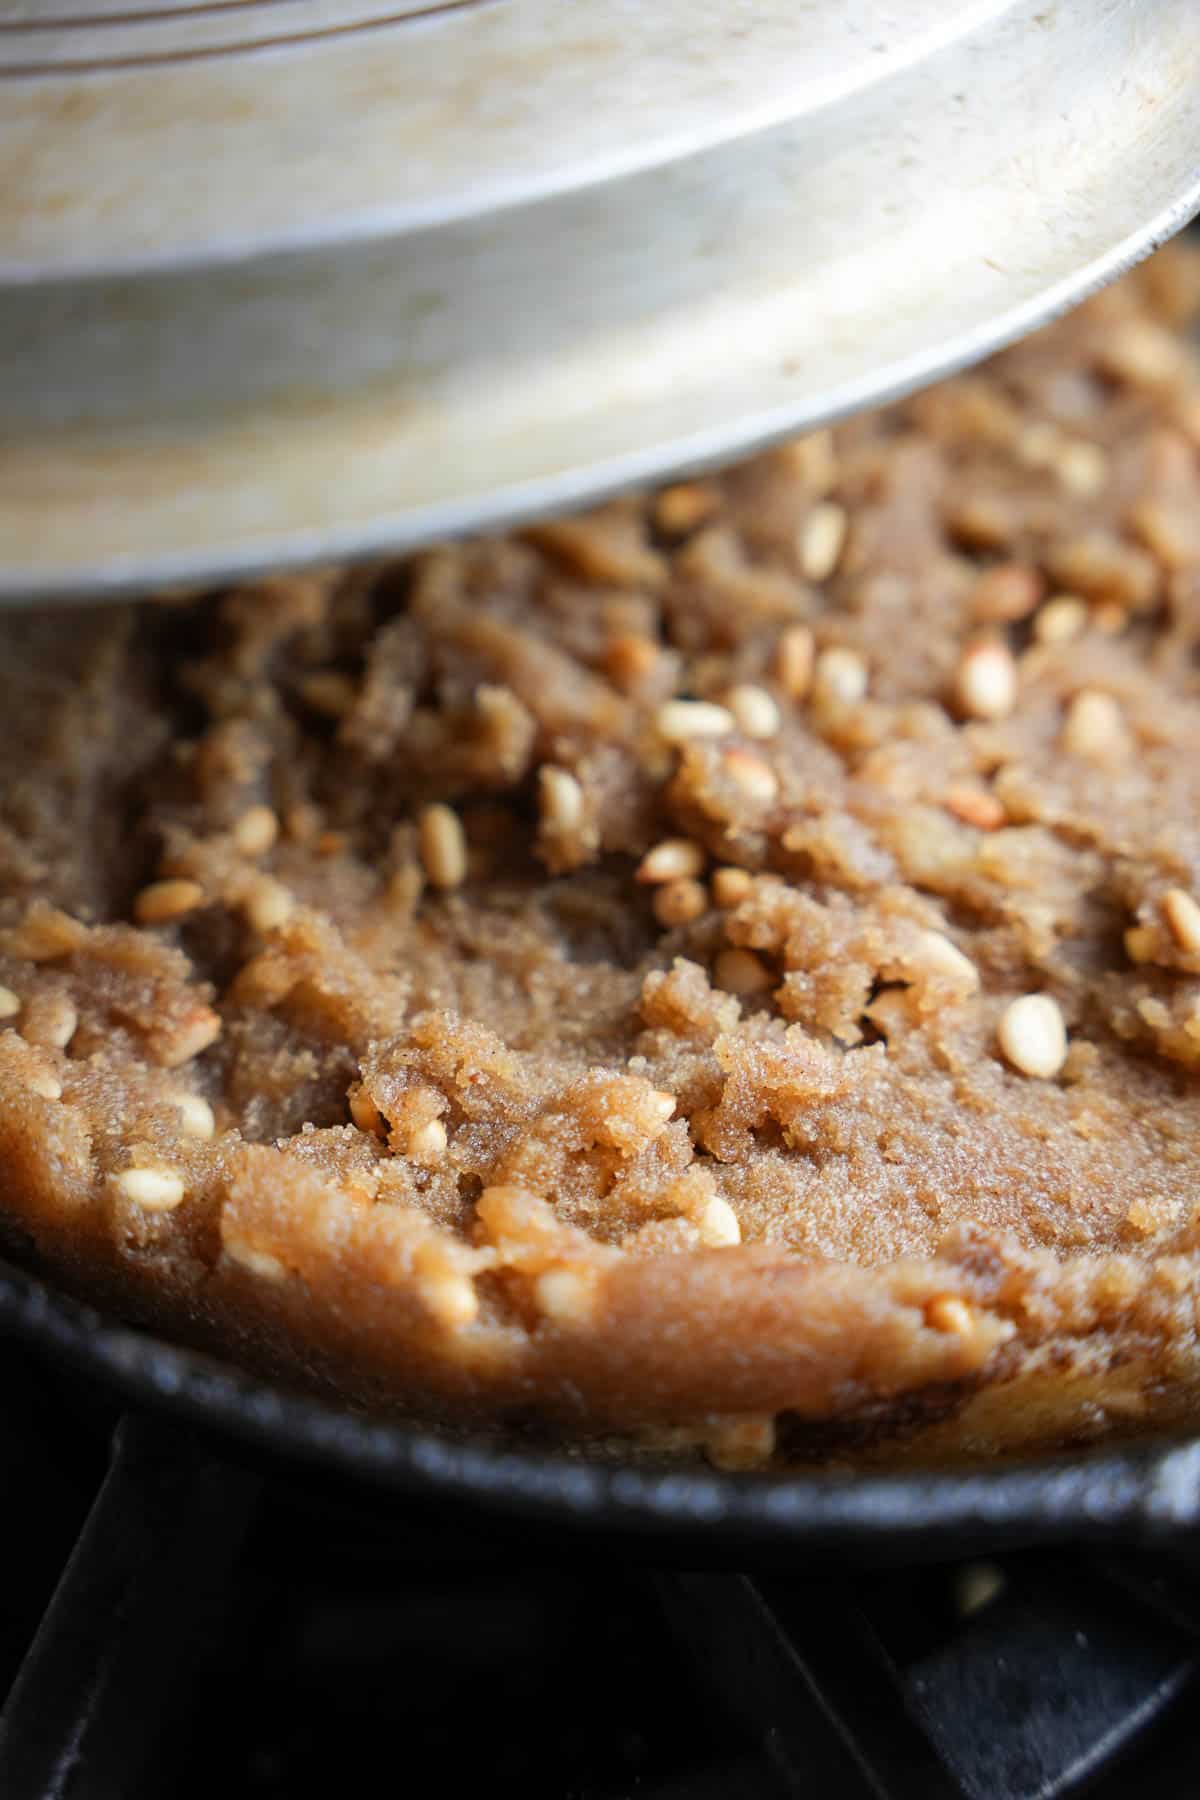 A lid is put over the cooked halva so that it steams as it cools in the pan.